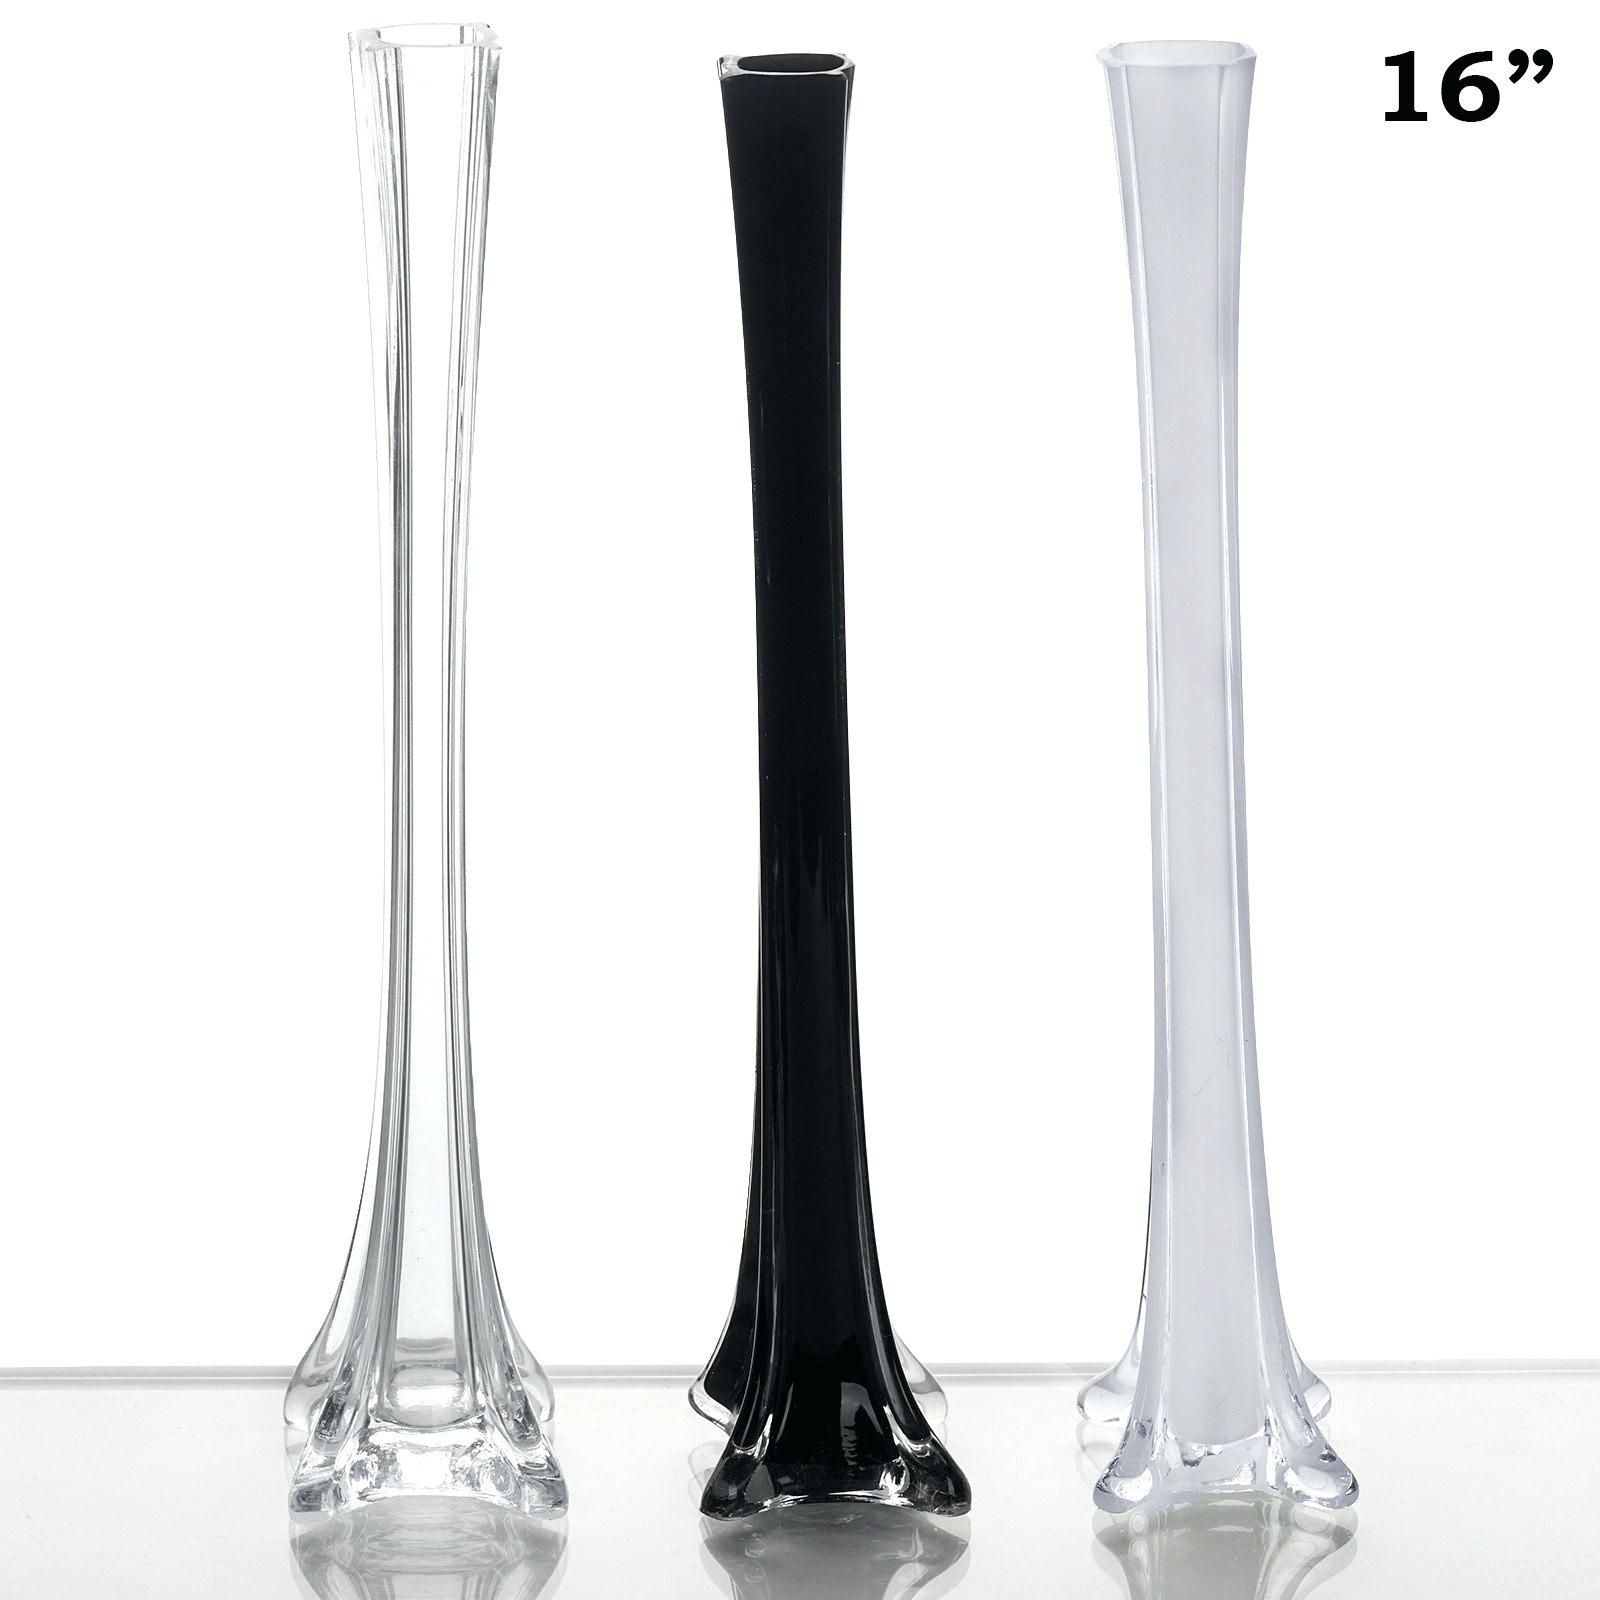 15 Stylish Clear Plastic Vases for Centerpieces 2024 free download clear plastic vases for centerpieces of 40 glass vases bulk the weekly world inside gallery plastic eiffel tower vases wholesale drawings art gallery